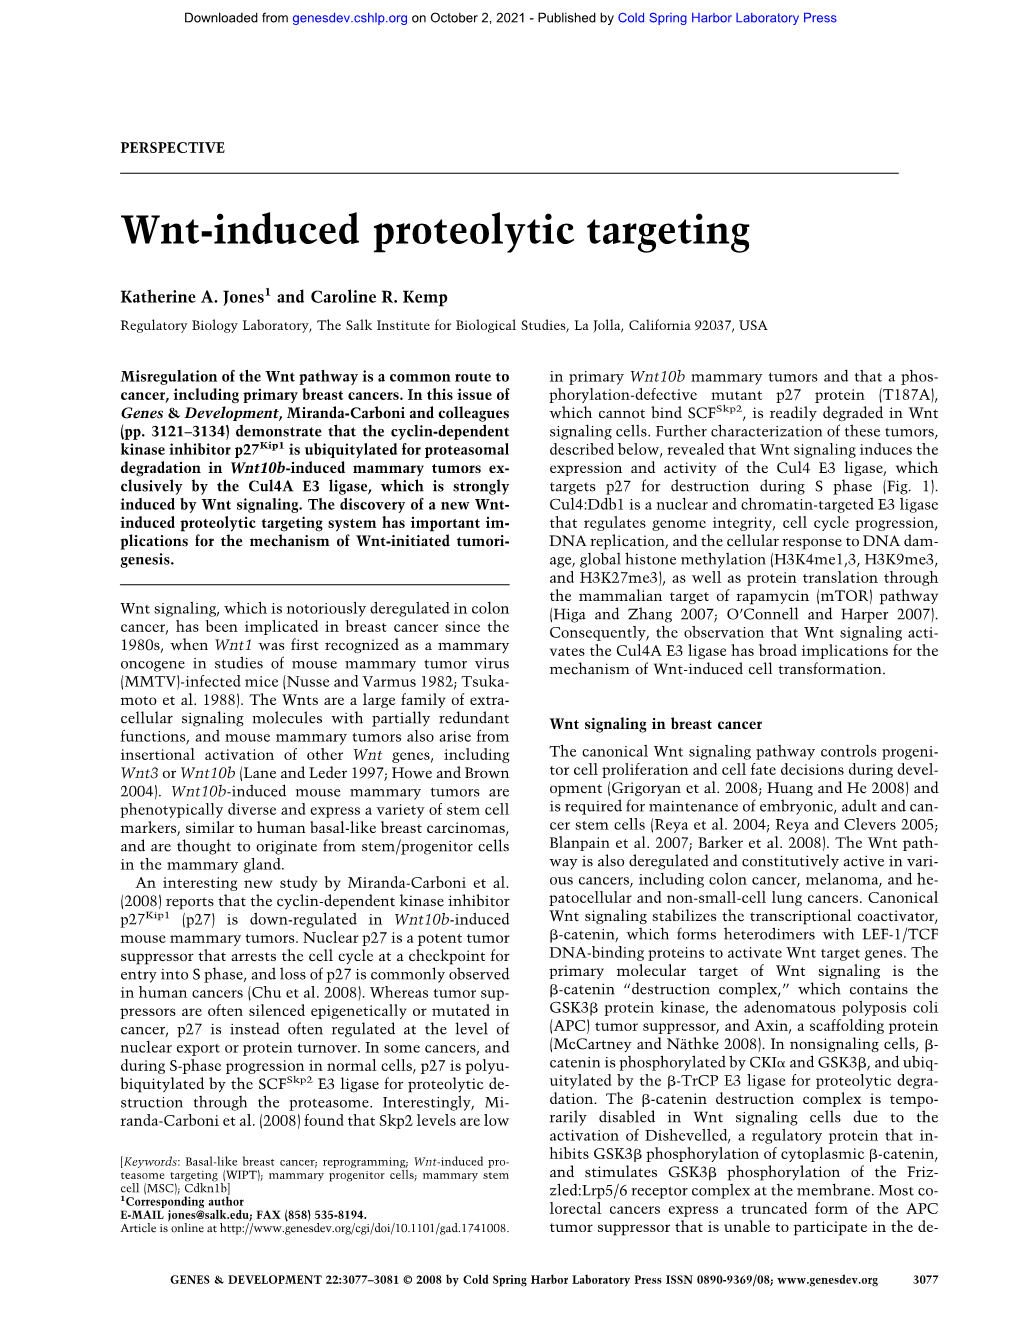 Wnt-Induced Proteolytic Targeting